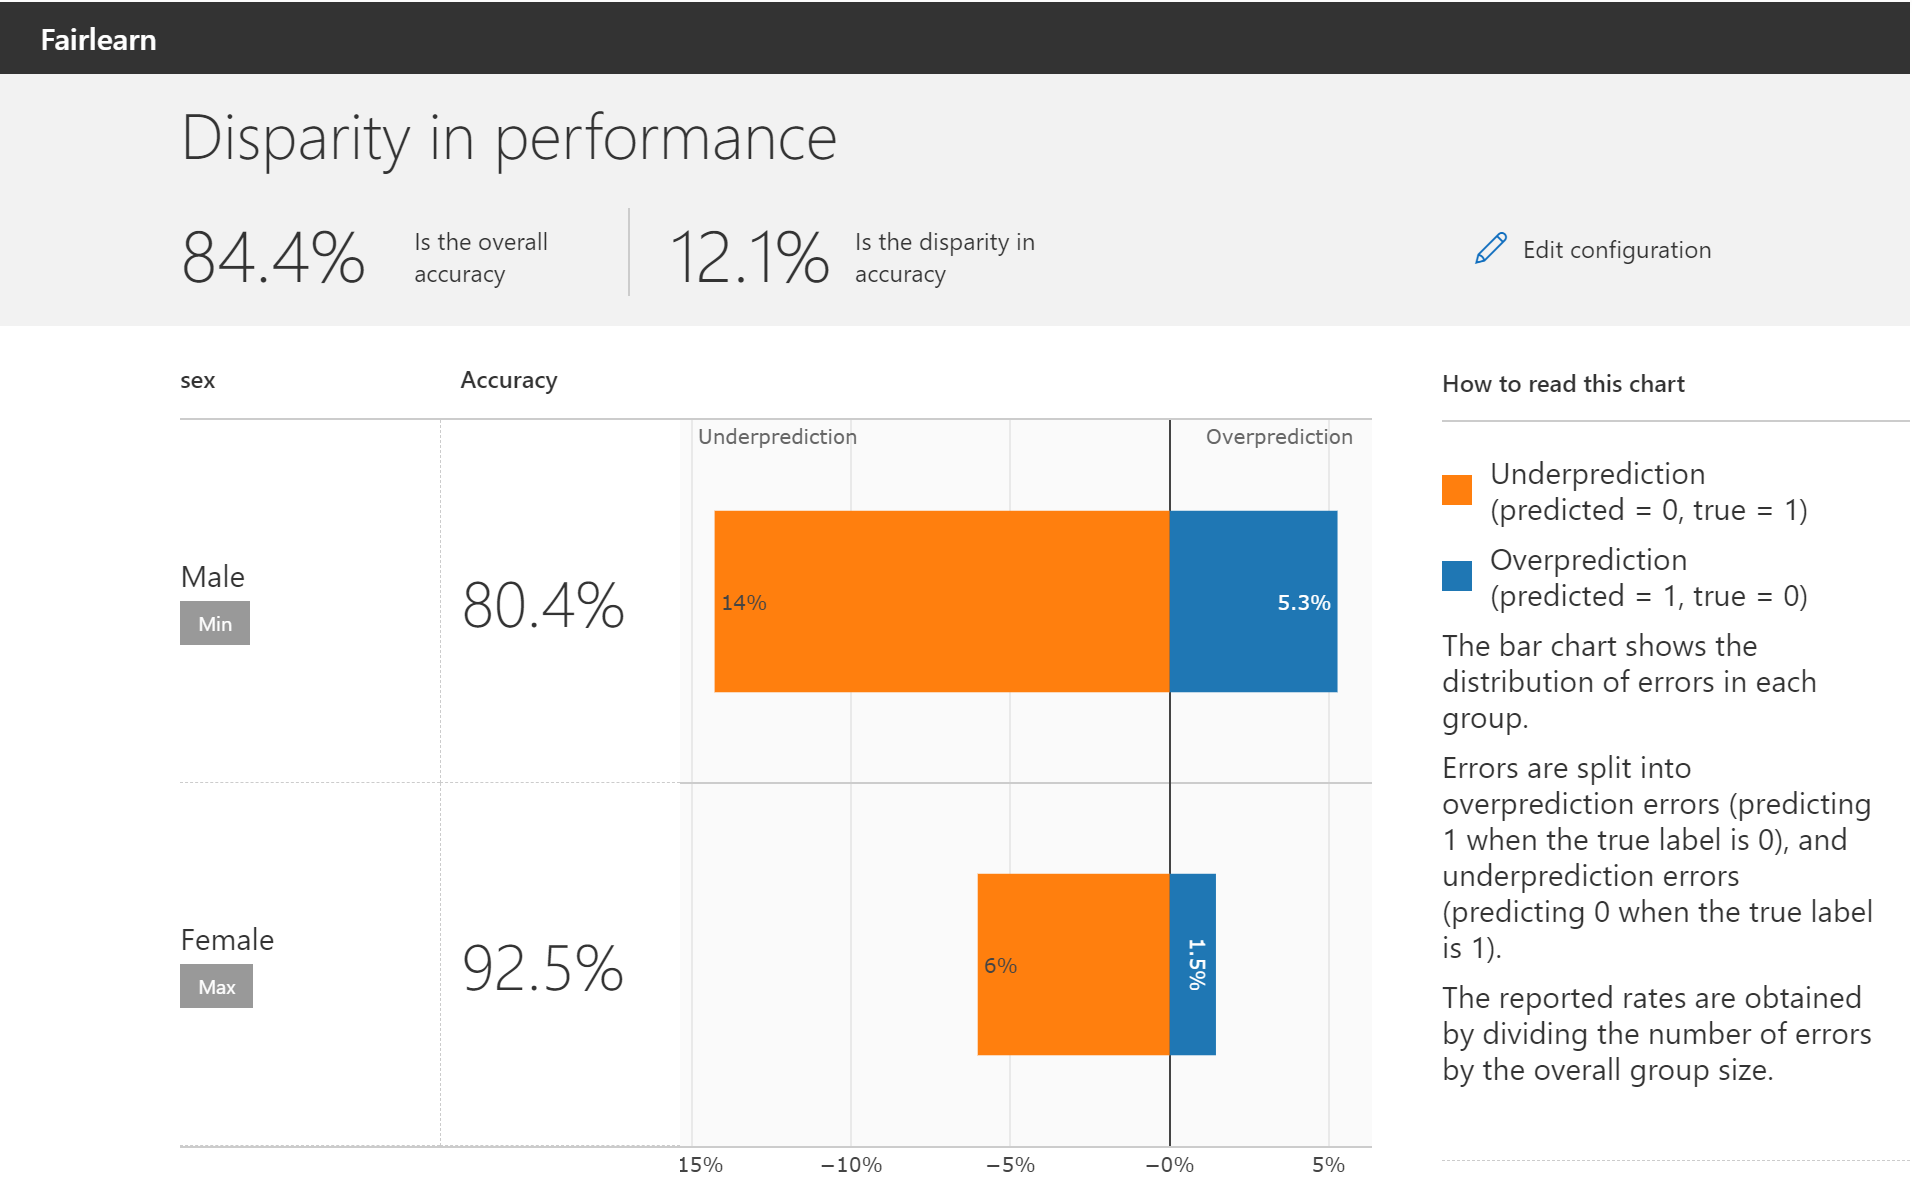 _images/fairlearn-dashboard-disparity-performance.png